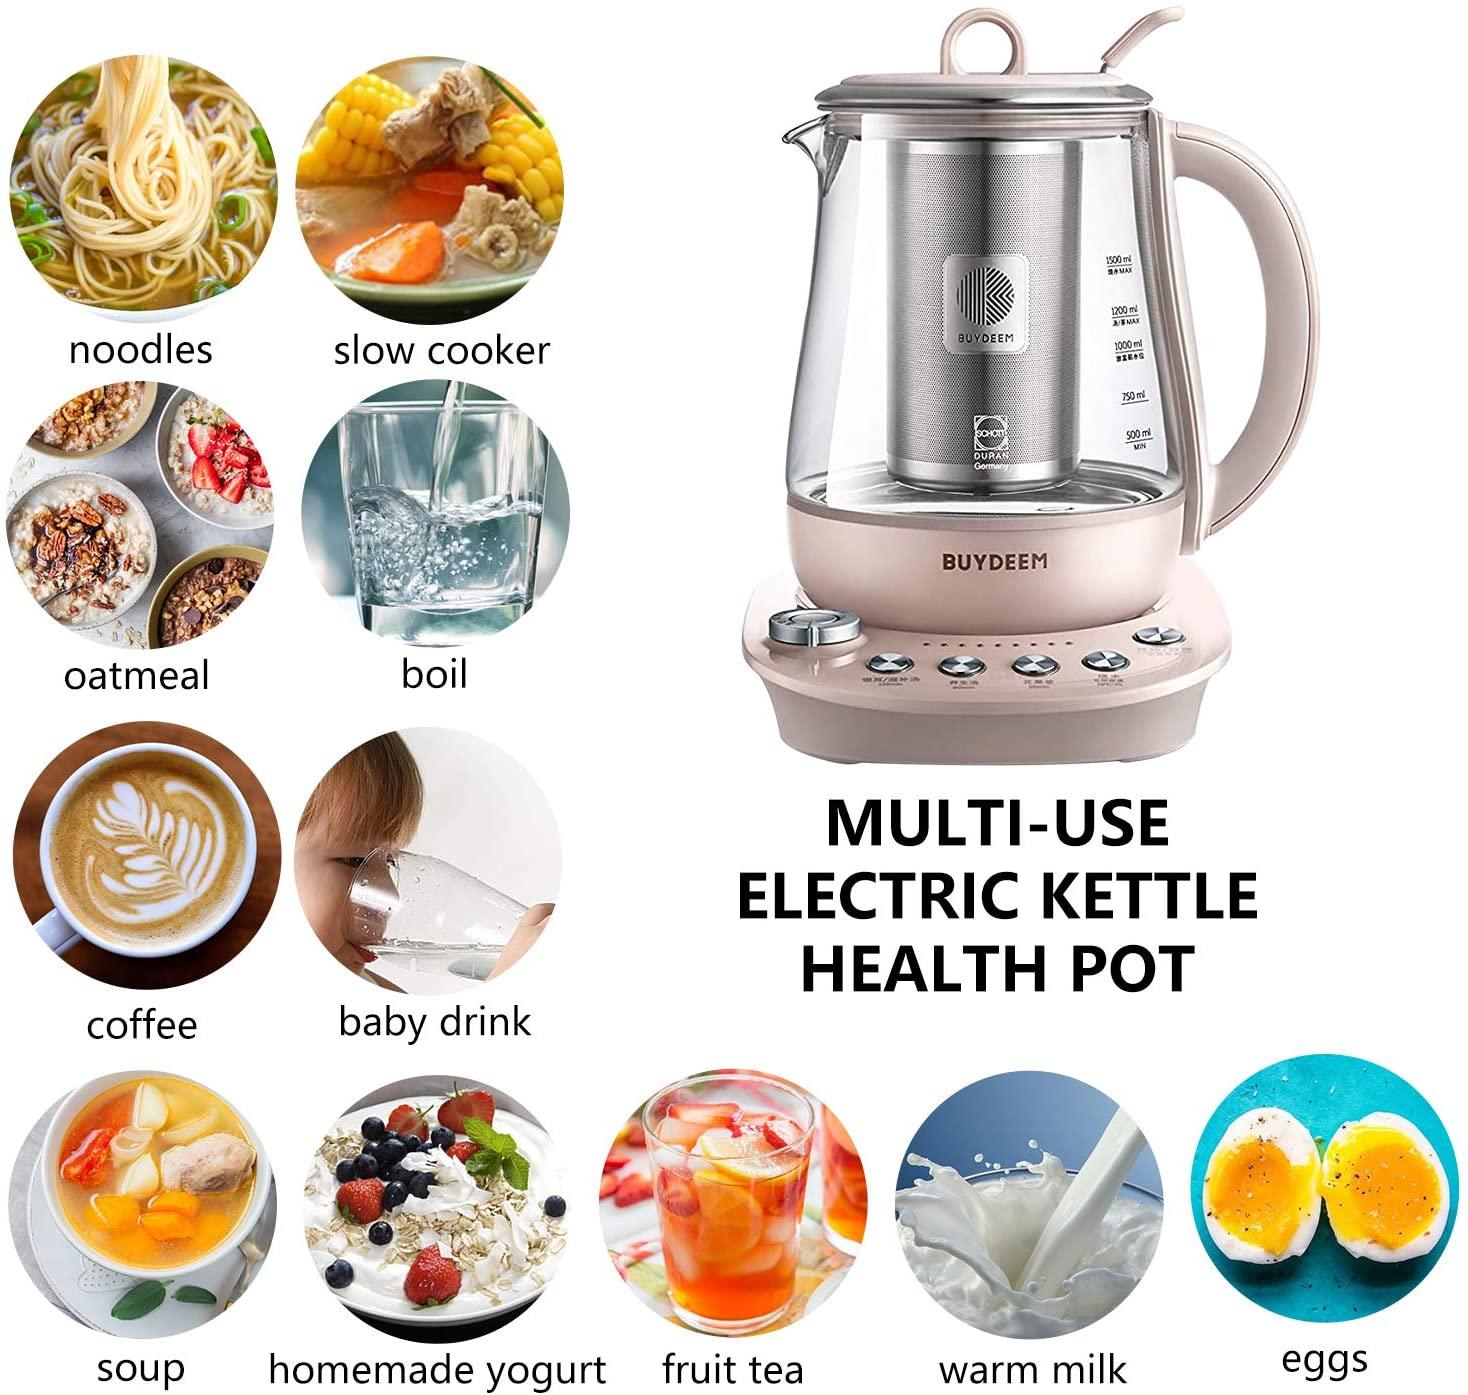 BUYDEEM K2693 Health Pot, Health-Care Beverage Electric Kettle with Thickened Glass, 9-in-1 Fully Automatic Programmable Brew Cooker, 1.5 L